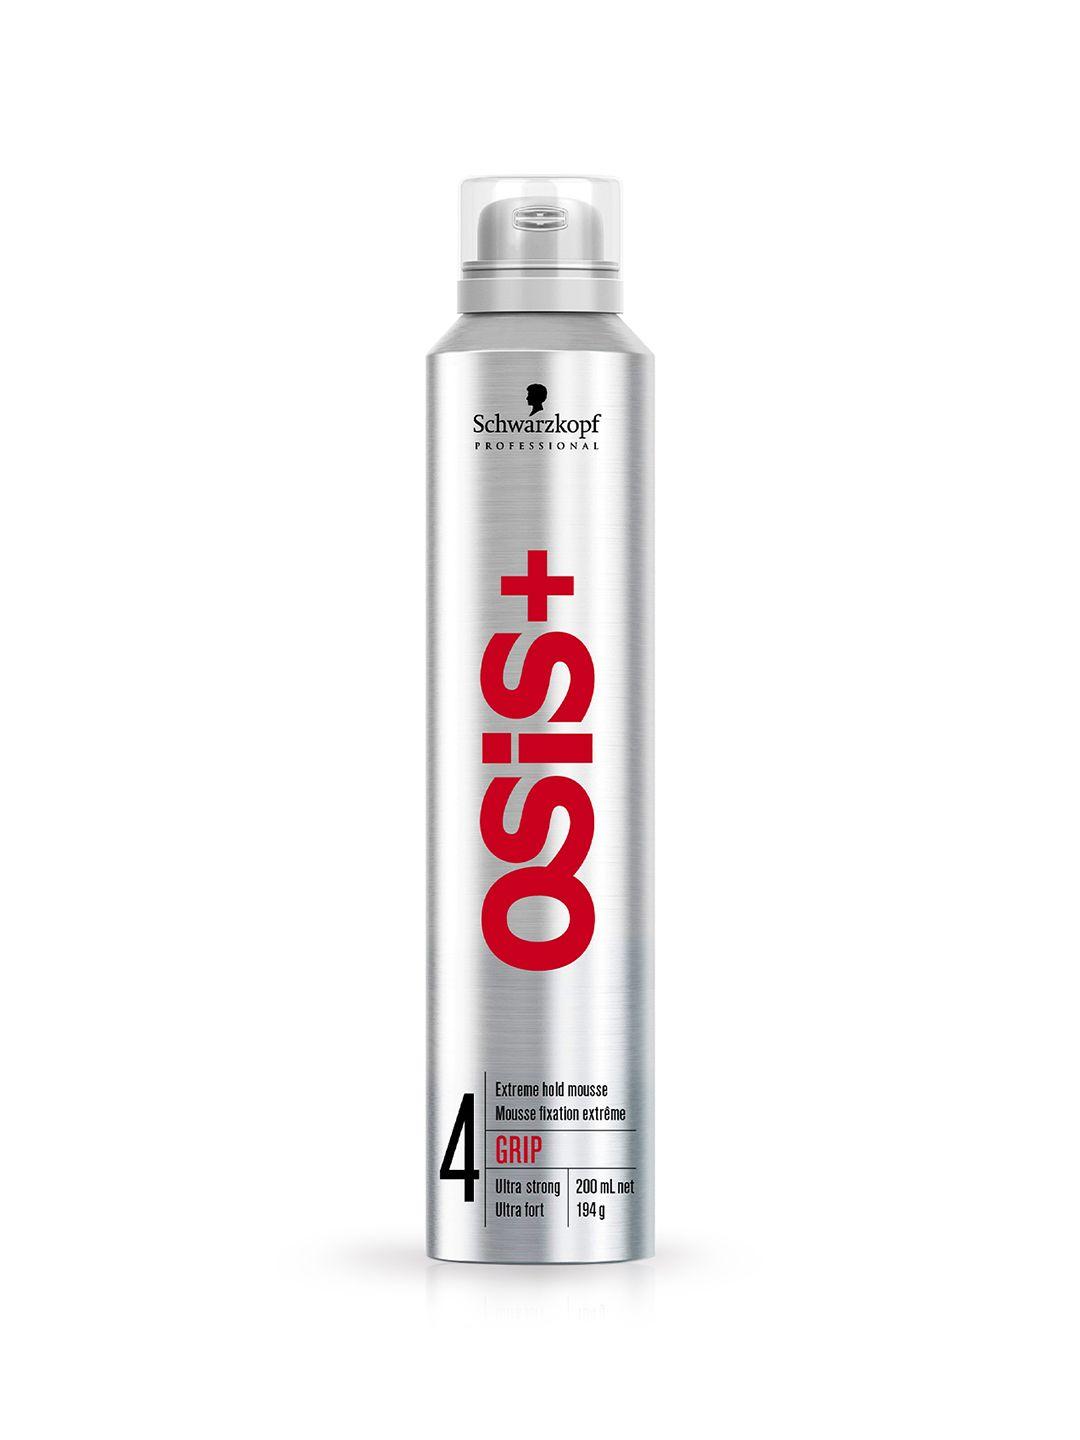 schwarzkopf professional osis+ grip extreme hold hair mousse - 200ml